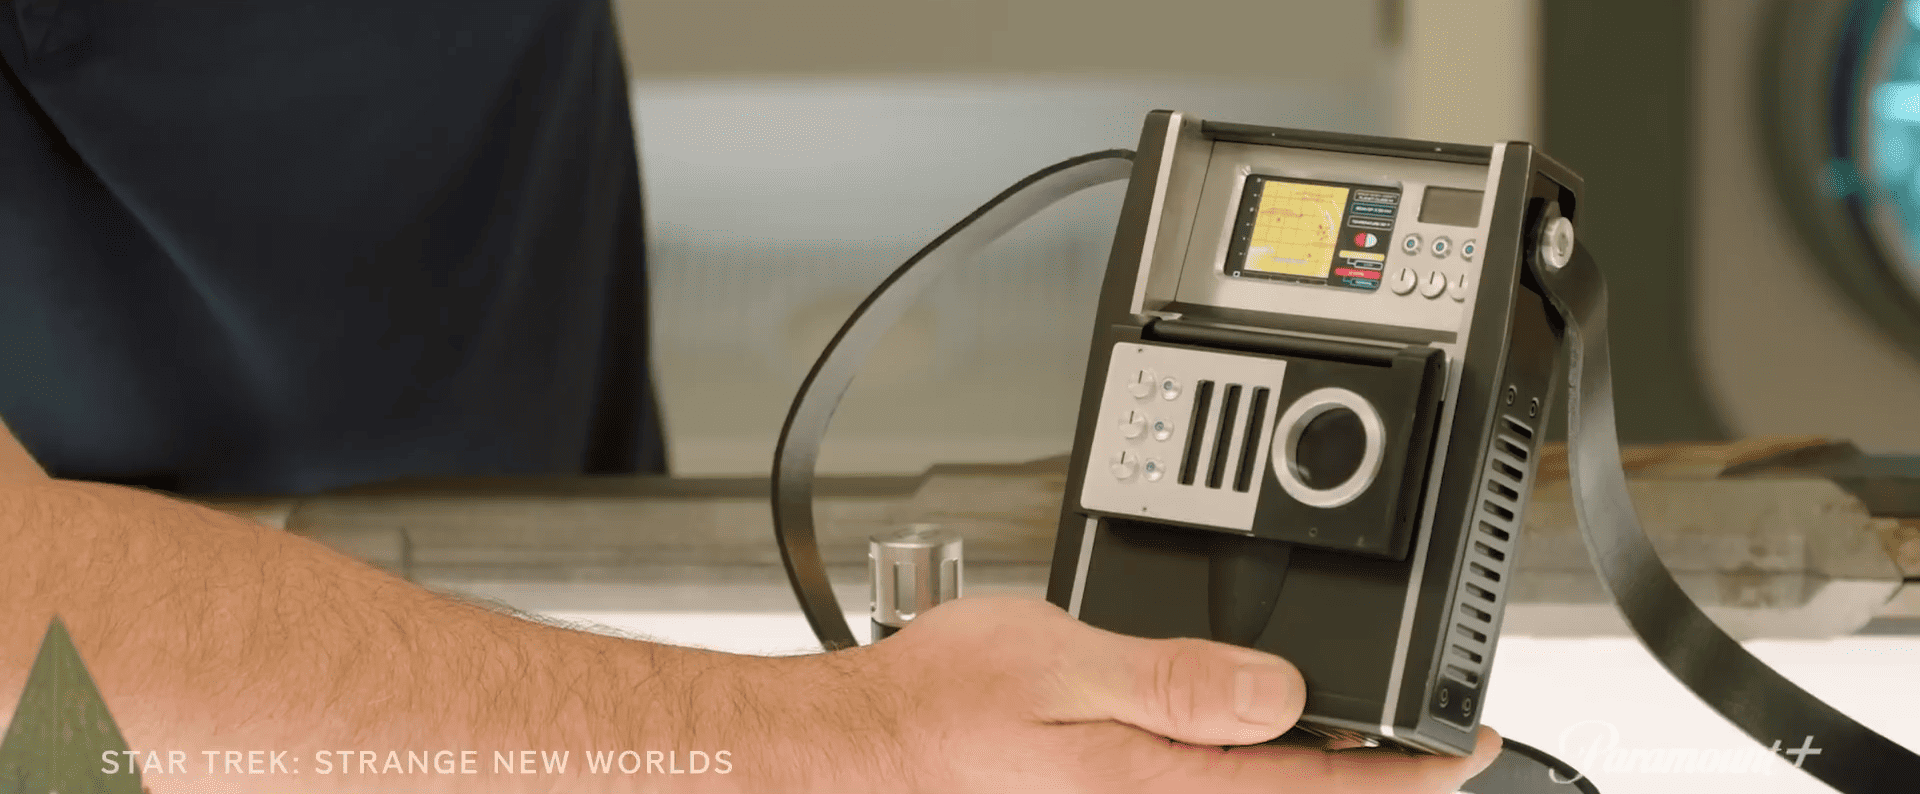 A retro electronic device in this image from CBS Studios